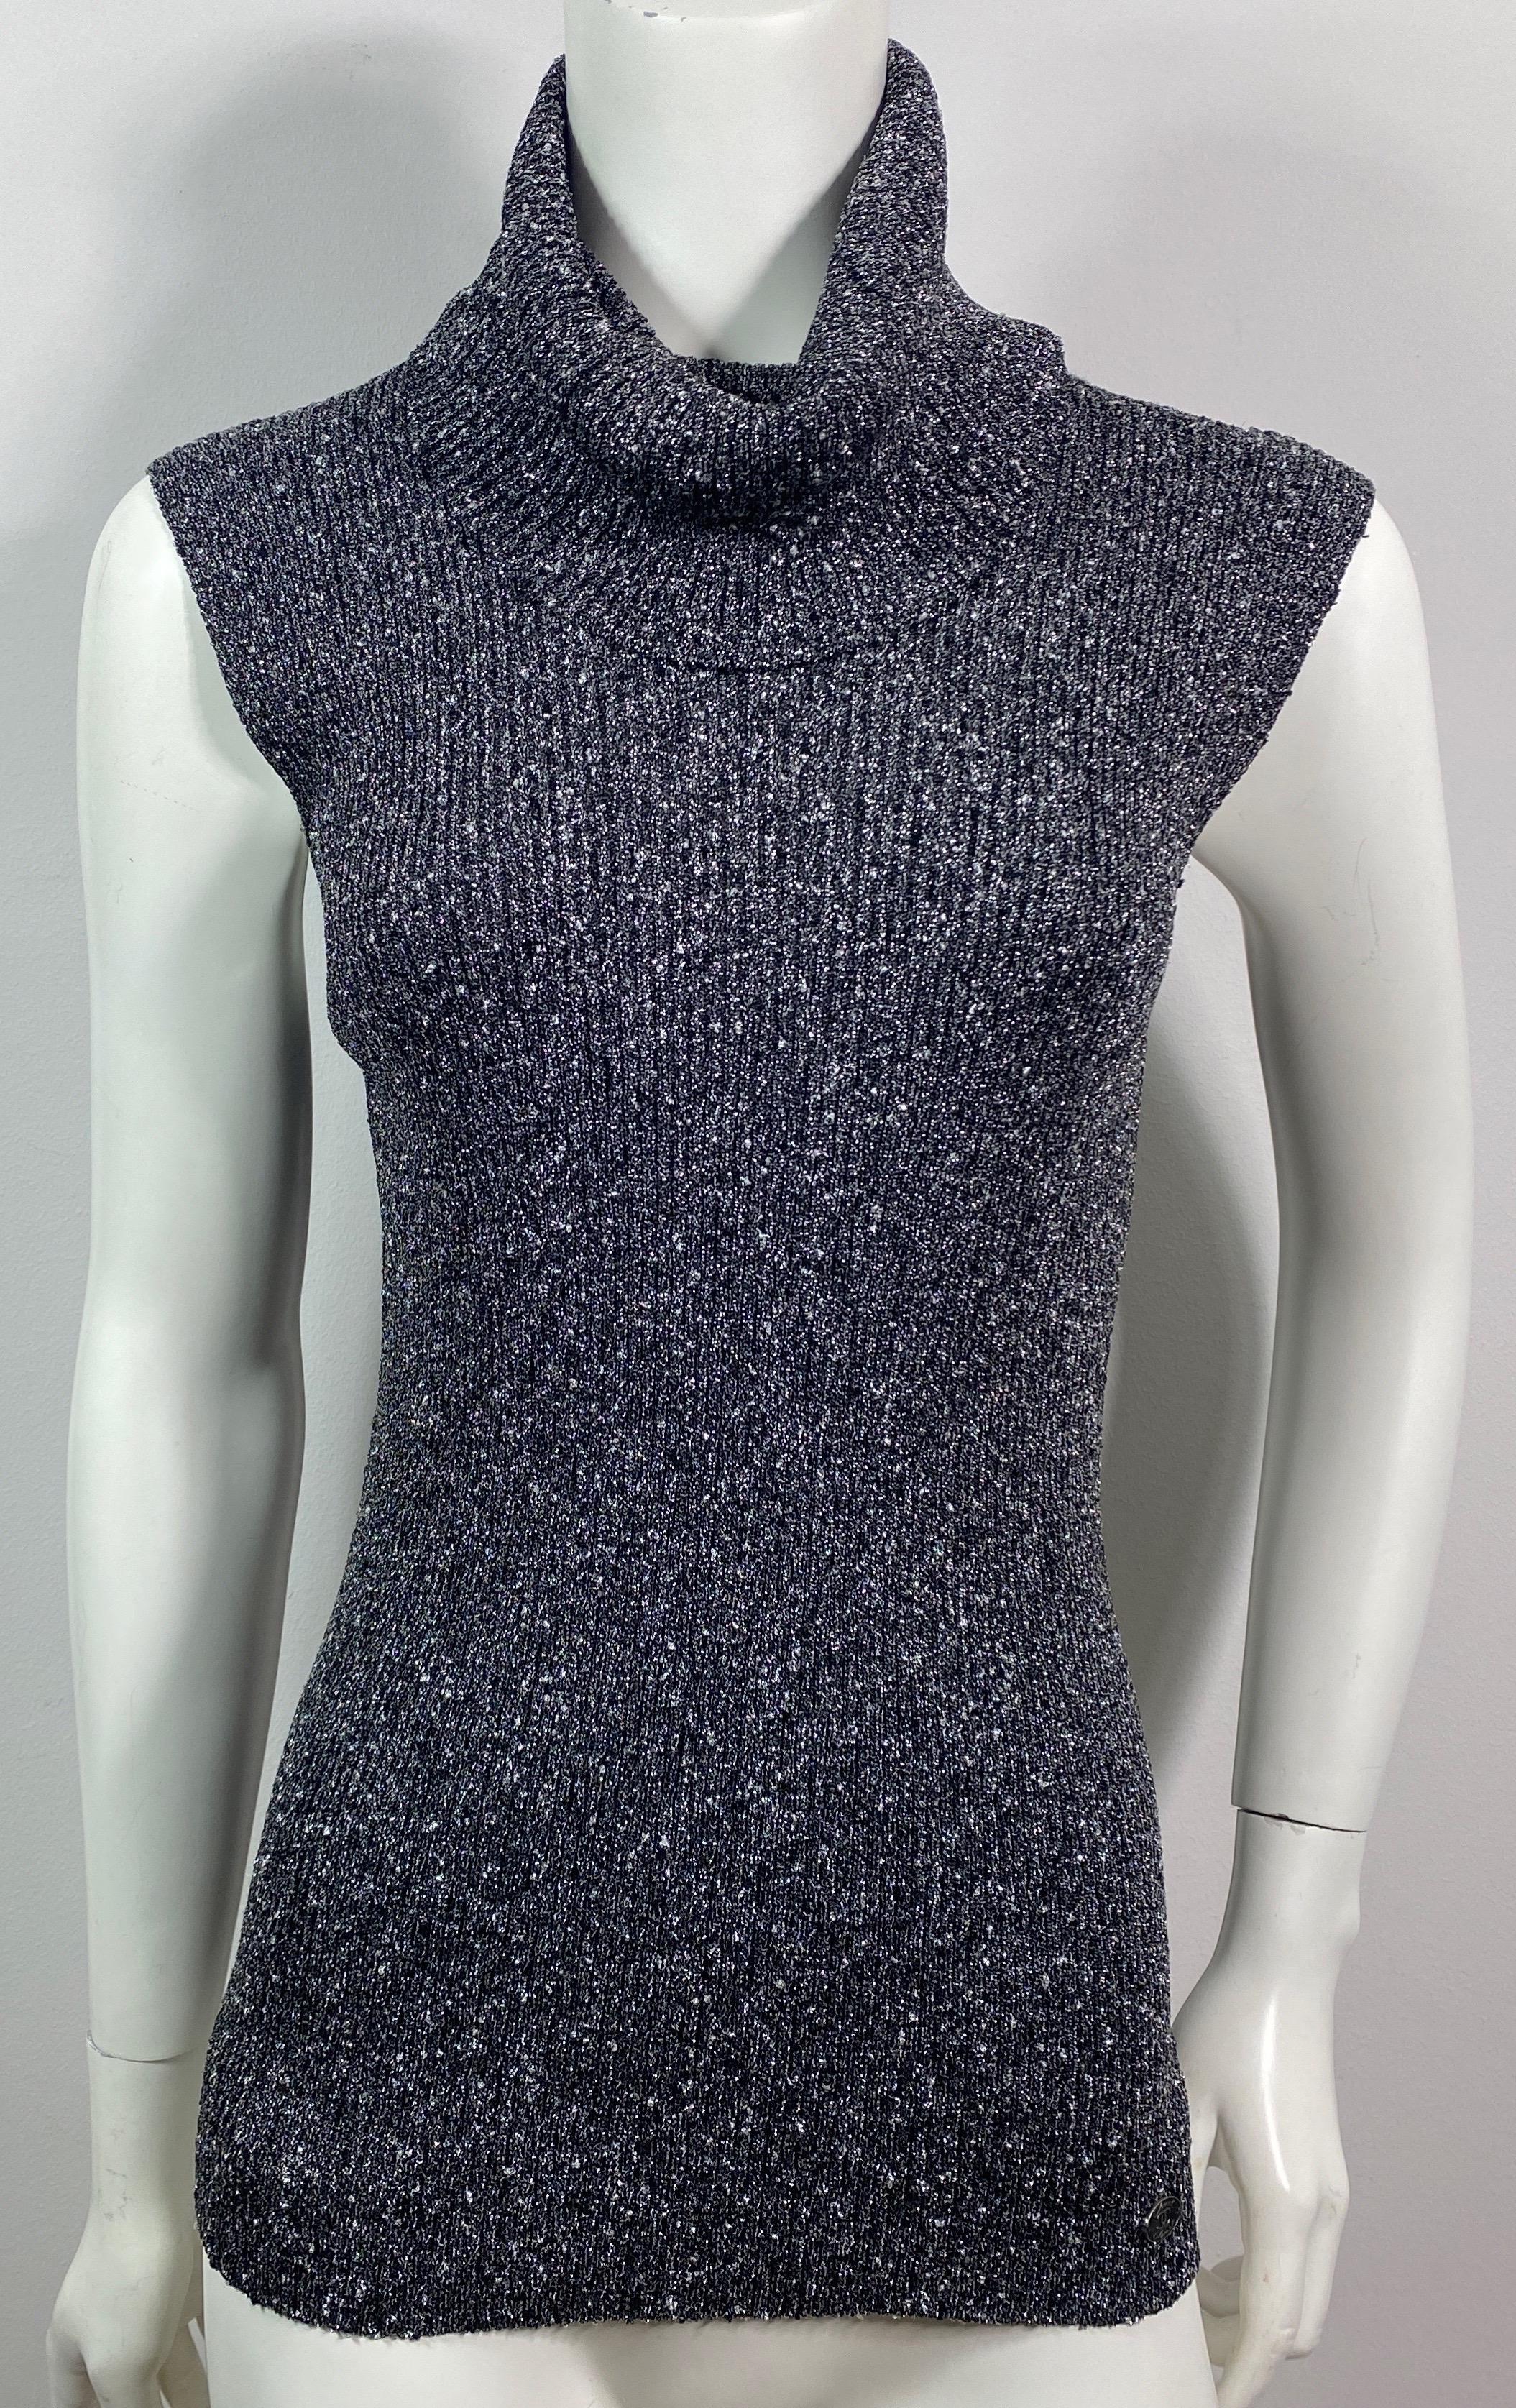 Chanel Runway Fall 2005 grey, black and silver metallic ribbed knit sleeveless turtleneck top - size 40
This runway piece was part of look 13 in the Fall 2005 fashion show. The fabric of this top is a viscose and metal knit with grey, black and